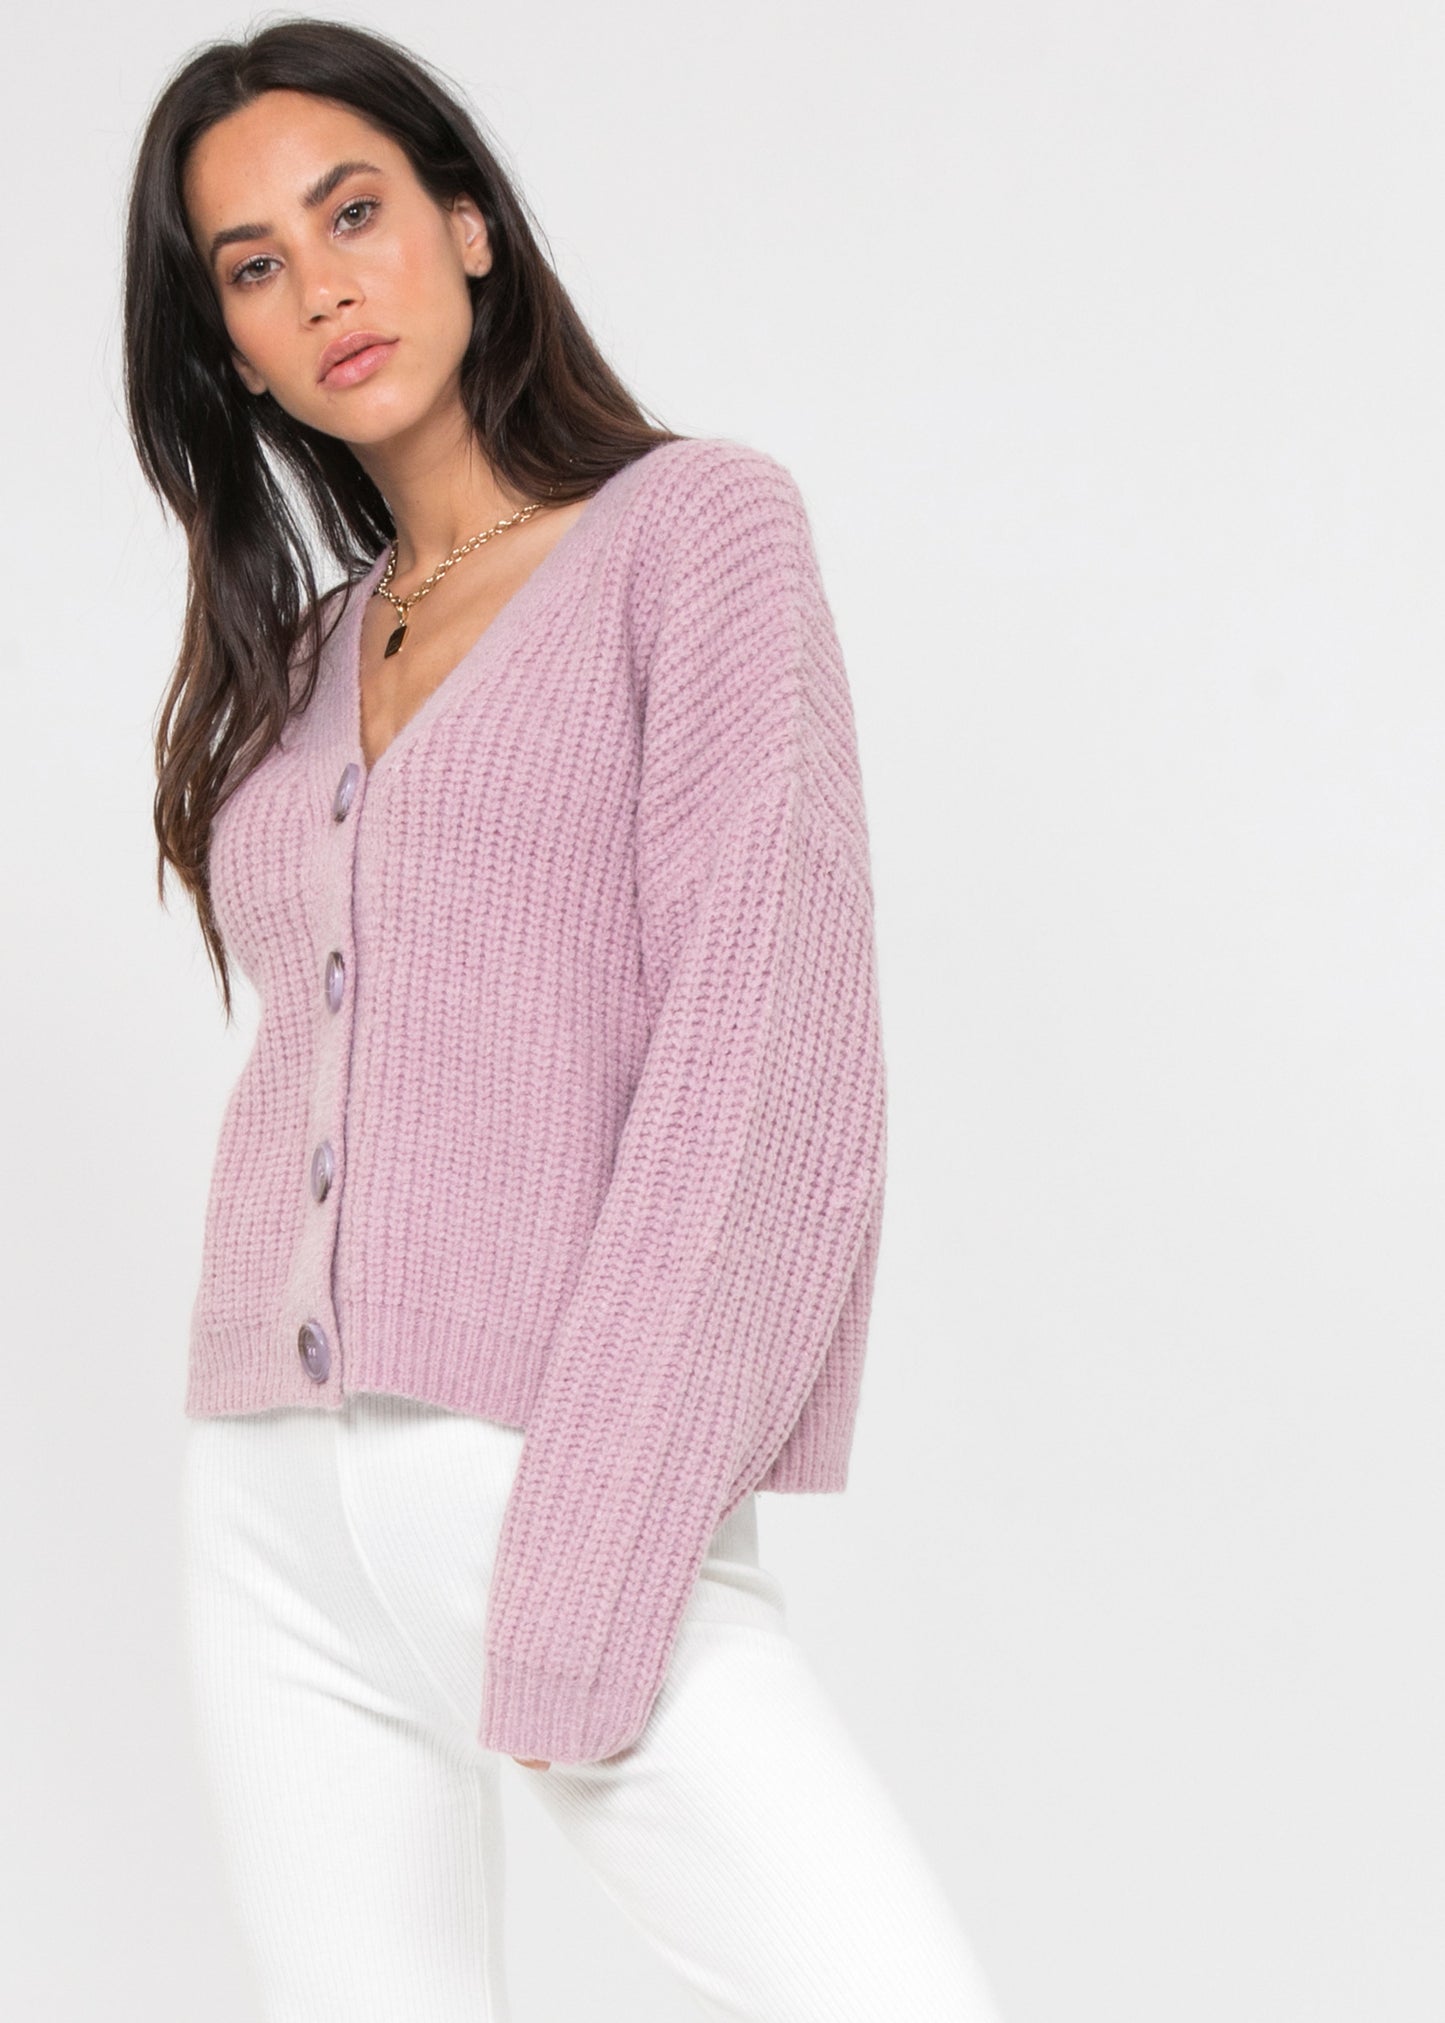 Lavender knit cardigan with buttons